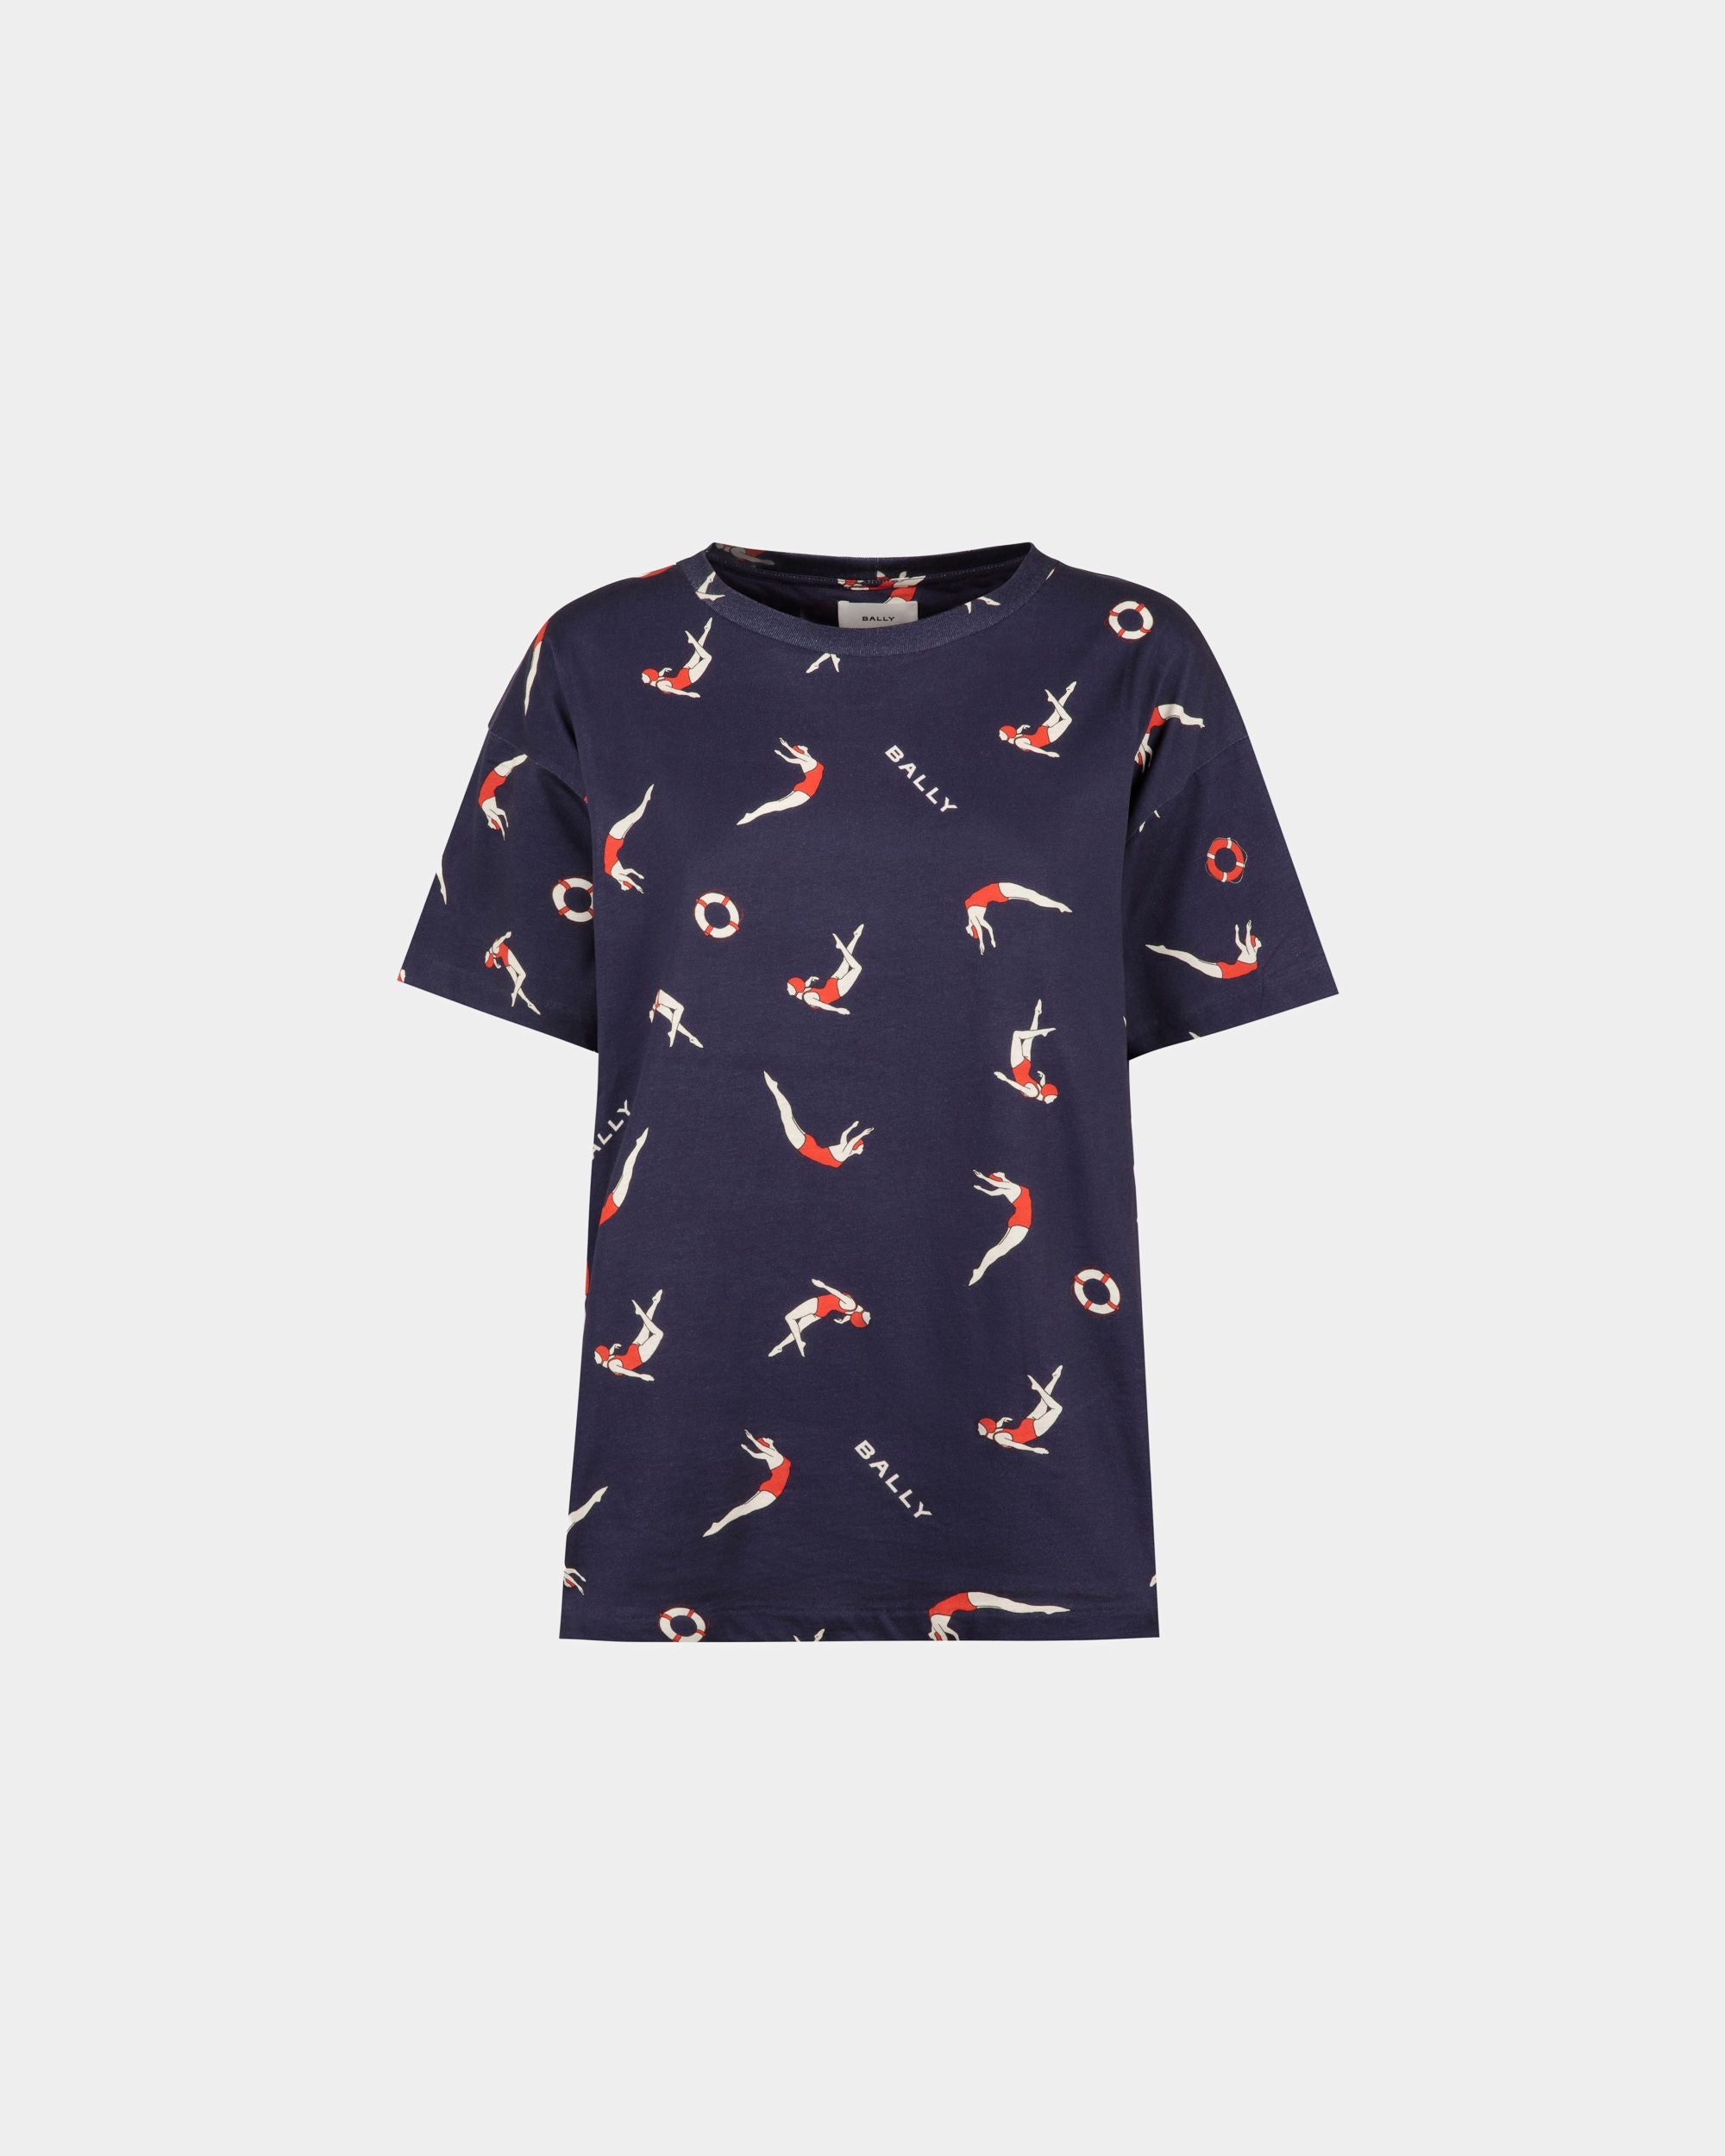 Women's Printed T-shirt in Blue Cotton | Bally | Still Life Front